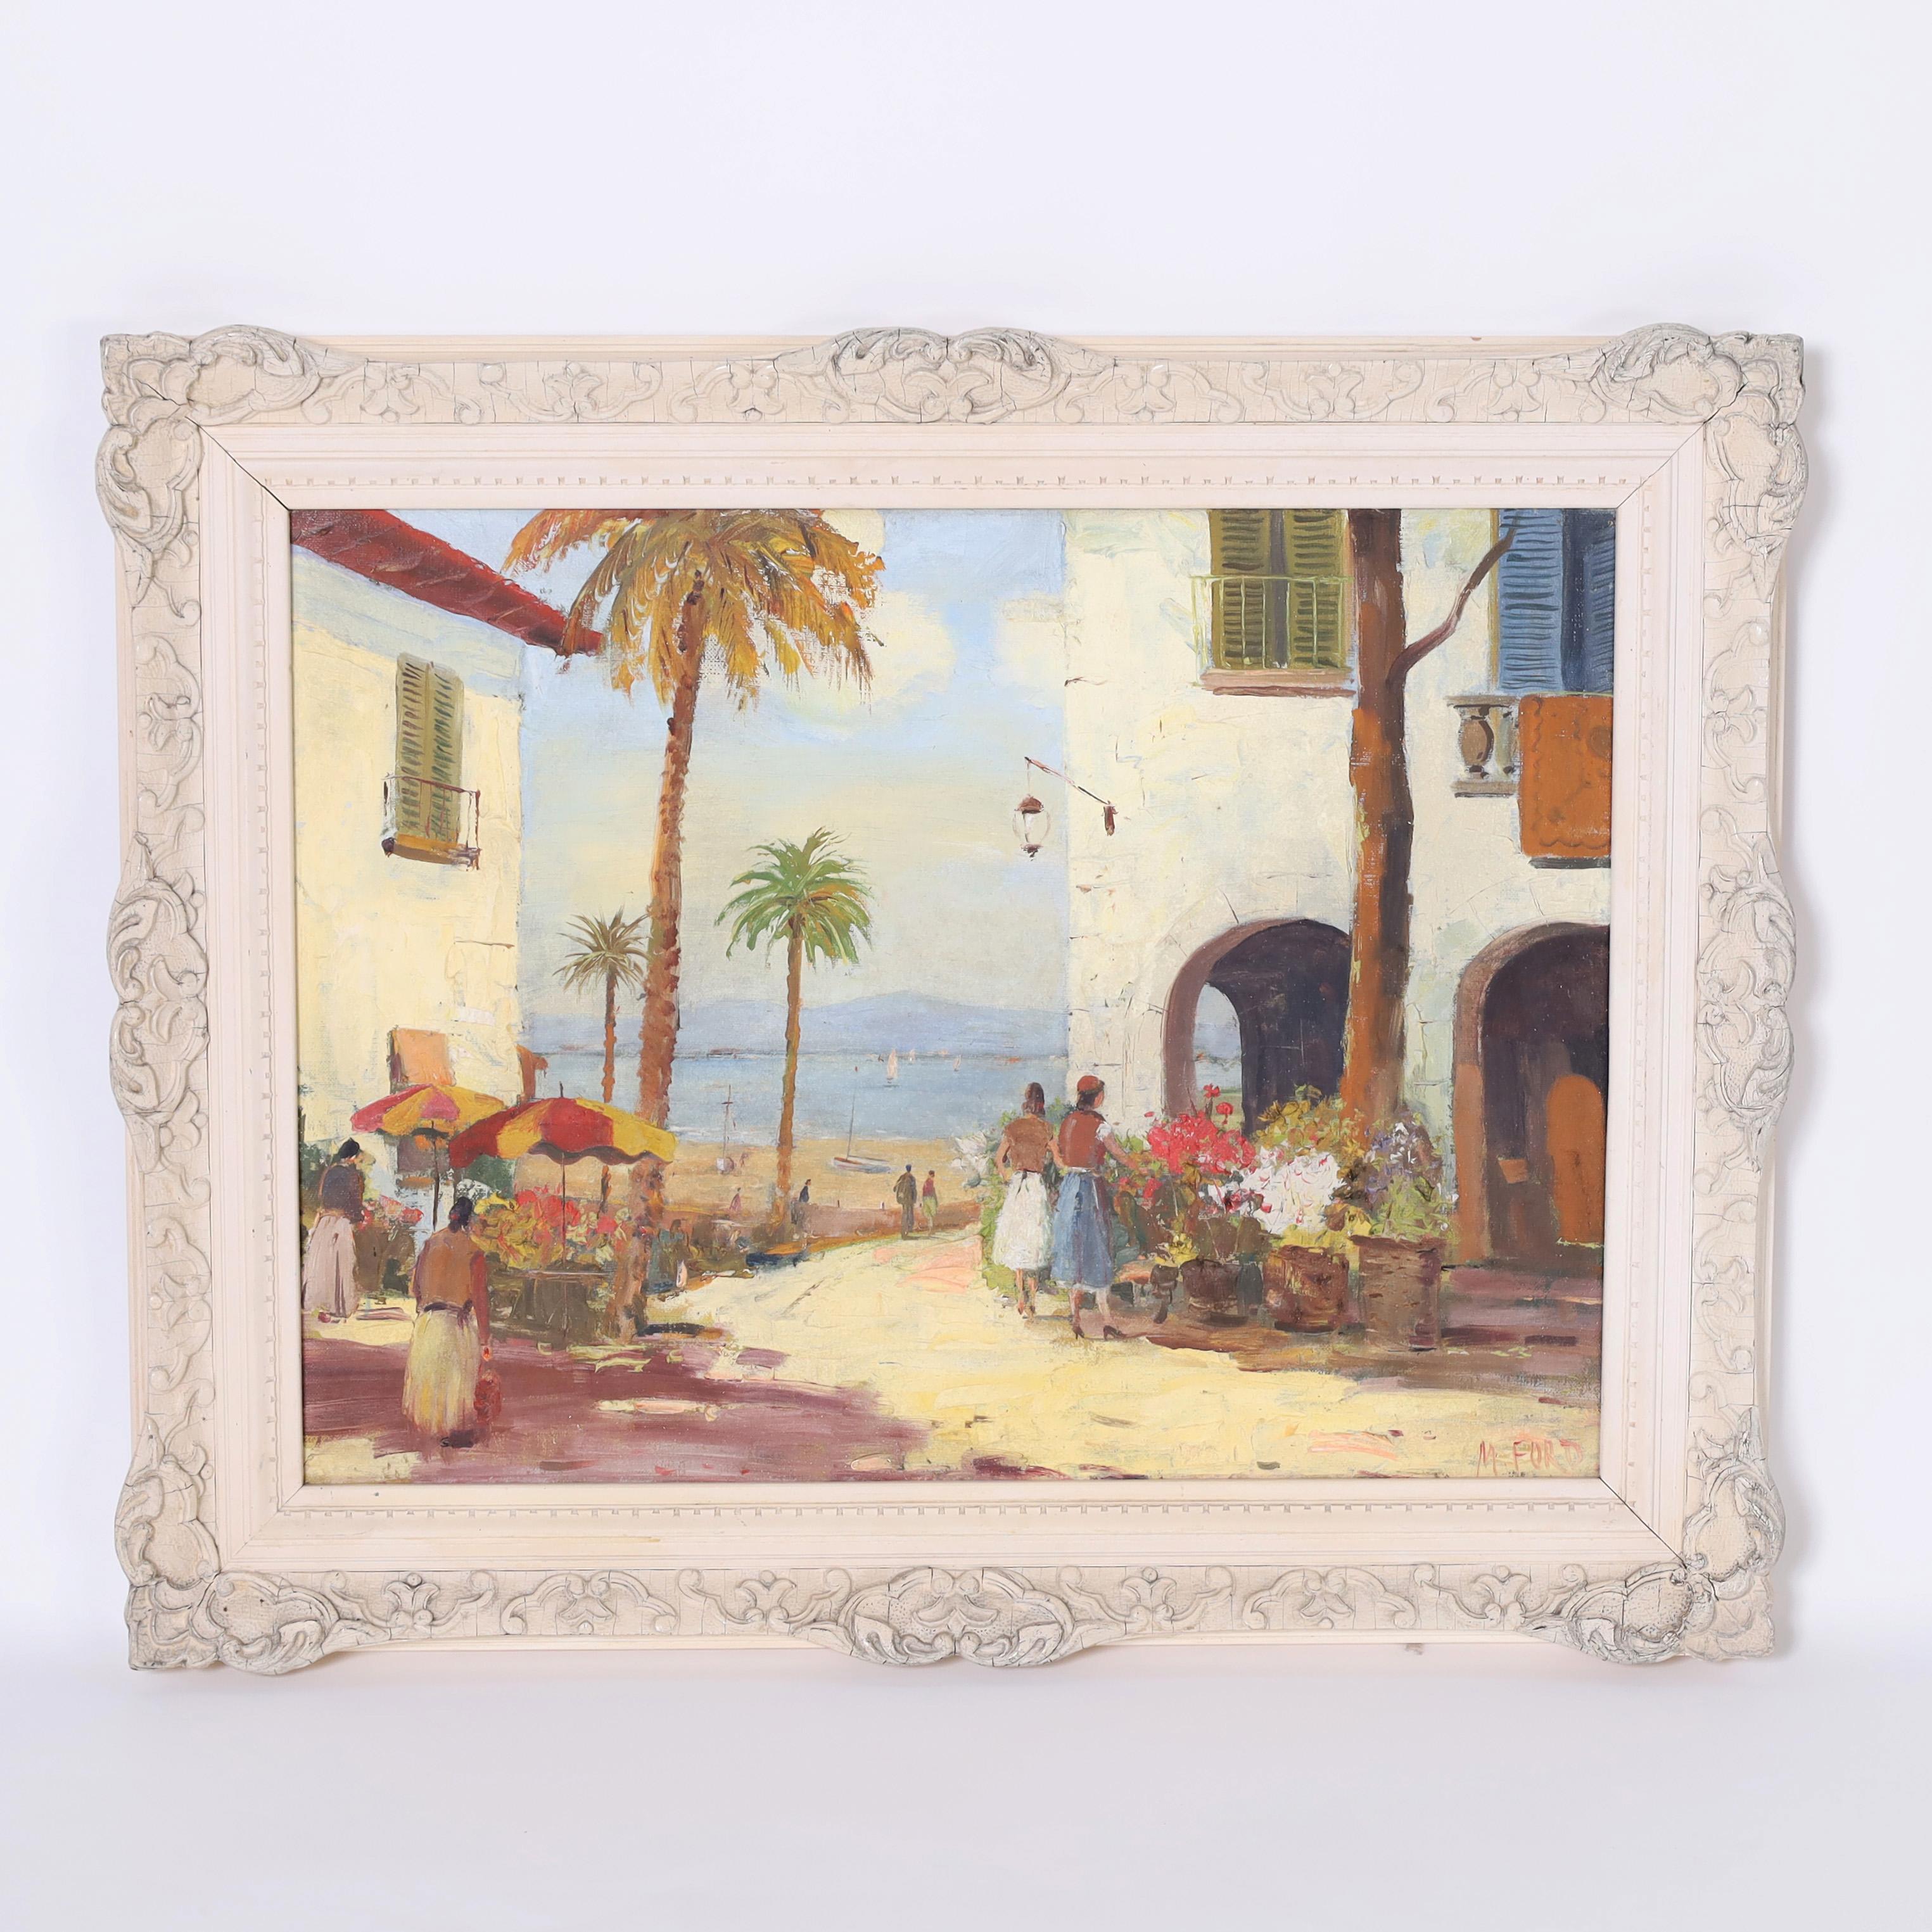 Enchanting oil painting on canvas depicting figures in a tropical setting with flowers, executed in an impressionist style, signed M Ford and presented in a painted wood frame.